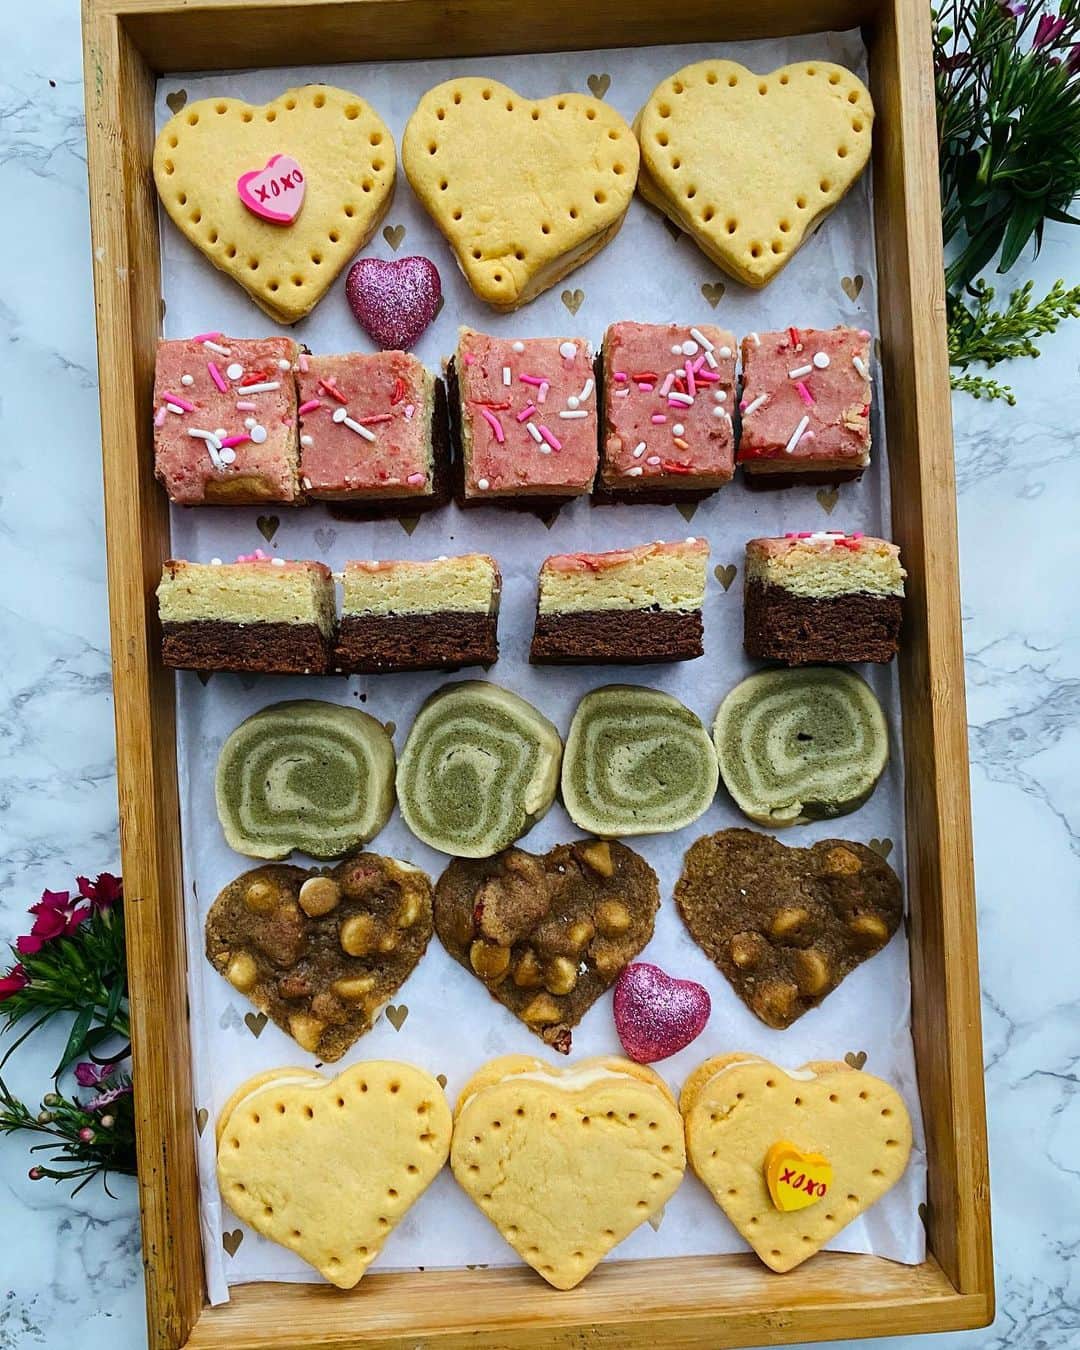 Antonietteのインスタグラム：「Hope your Valentine’s Day was sweet! Made these cookies for my boo as we are a batch made in heaven! 🍪 Cringe, lol. 😬 Made some  strawberry, almond and chocolate layered Italian cookies, custard cream hearts, matcha swirl shortbread and strawberry white chocolate heart cookies. 🤍🍓」